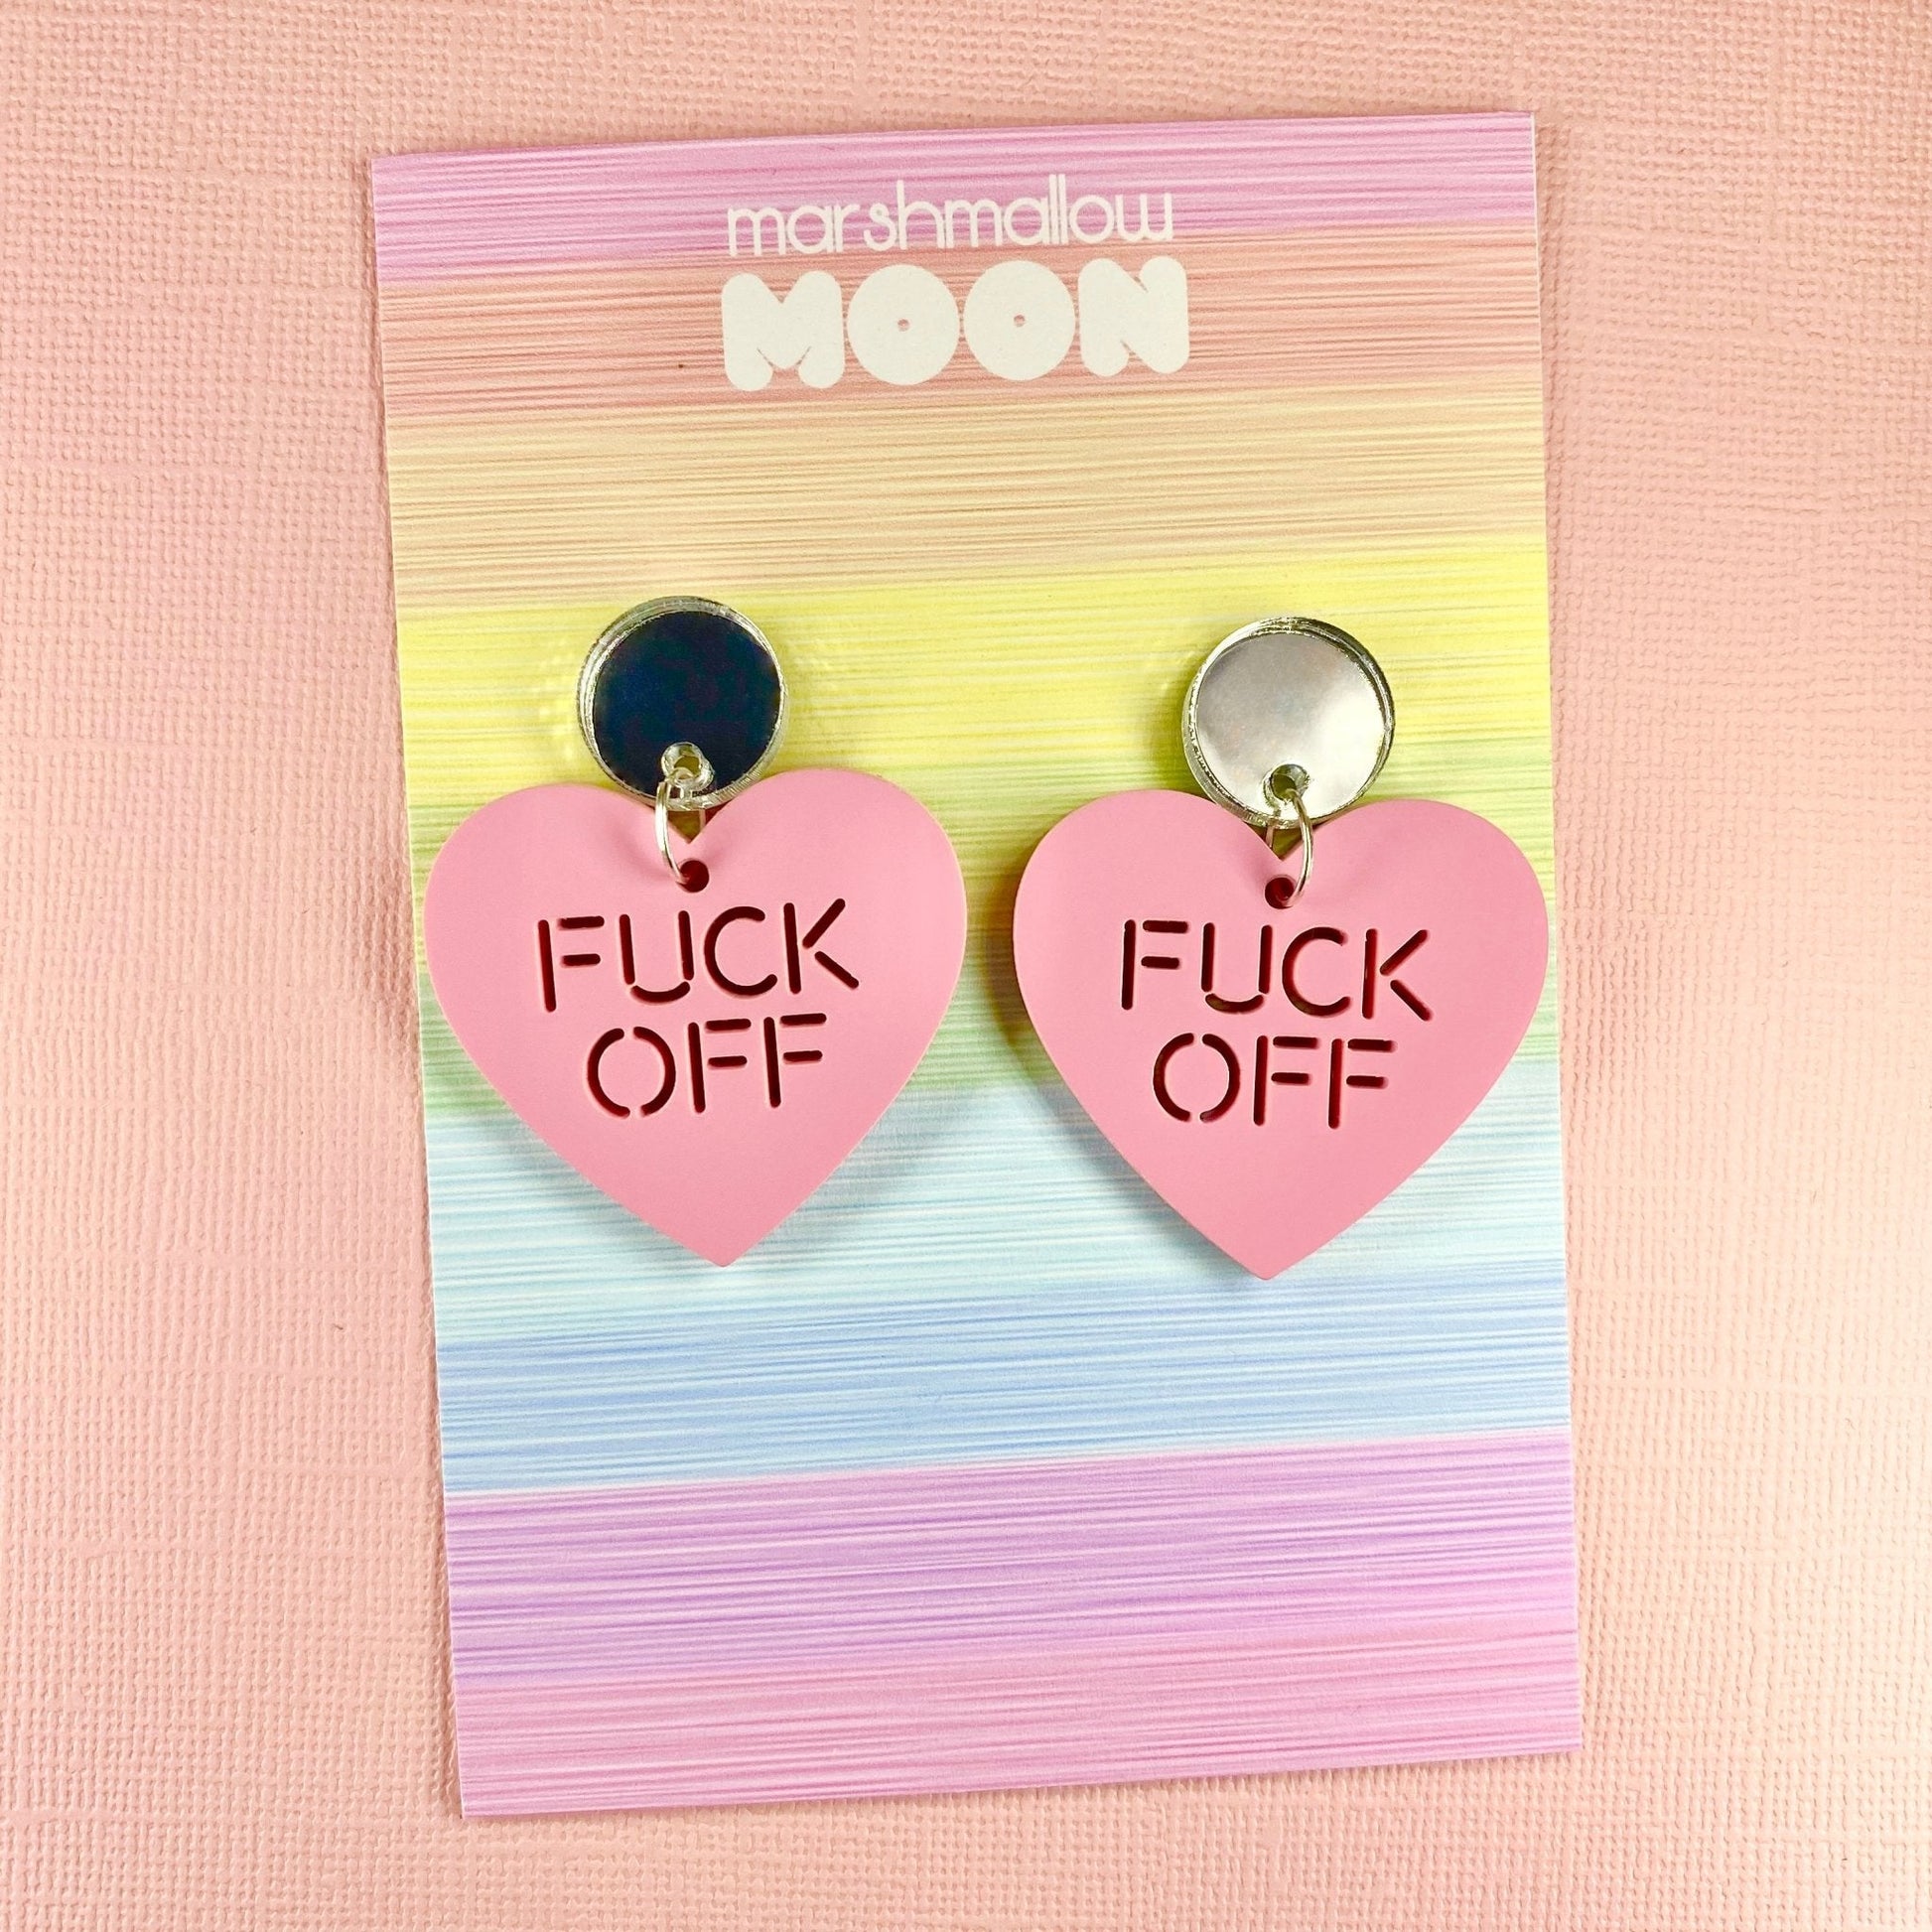 F-ck Off Candy Heart Earrings (6 colours available) - Lost Minds Clothing